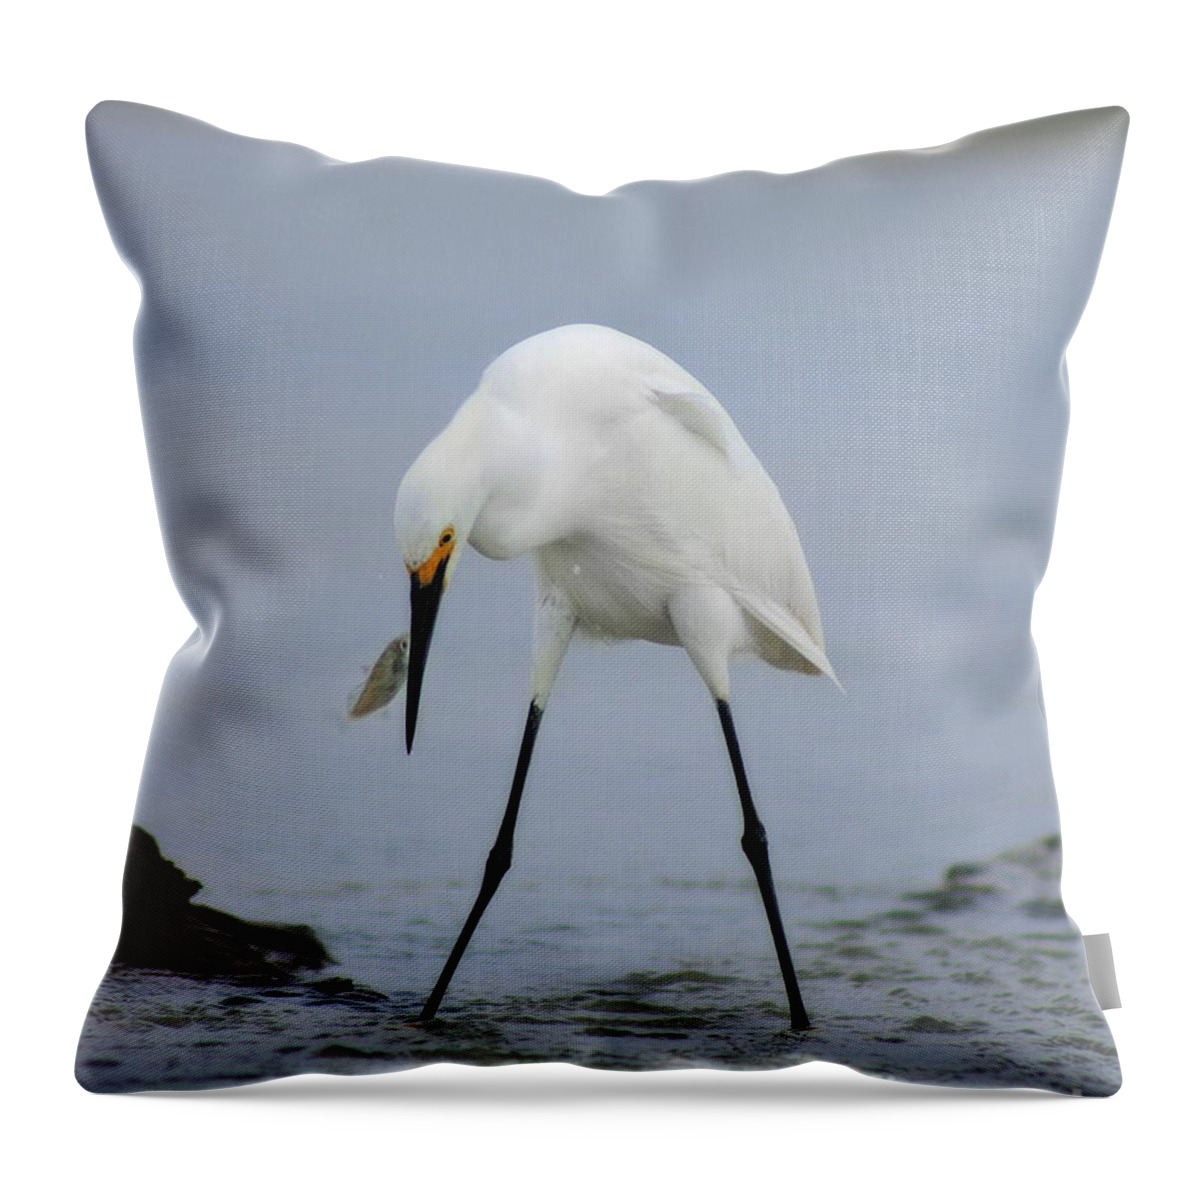  Throw Pillow featuring the photograph Got One #2 by Angela Rath